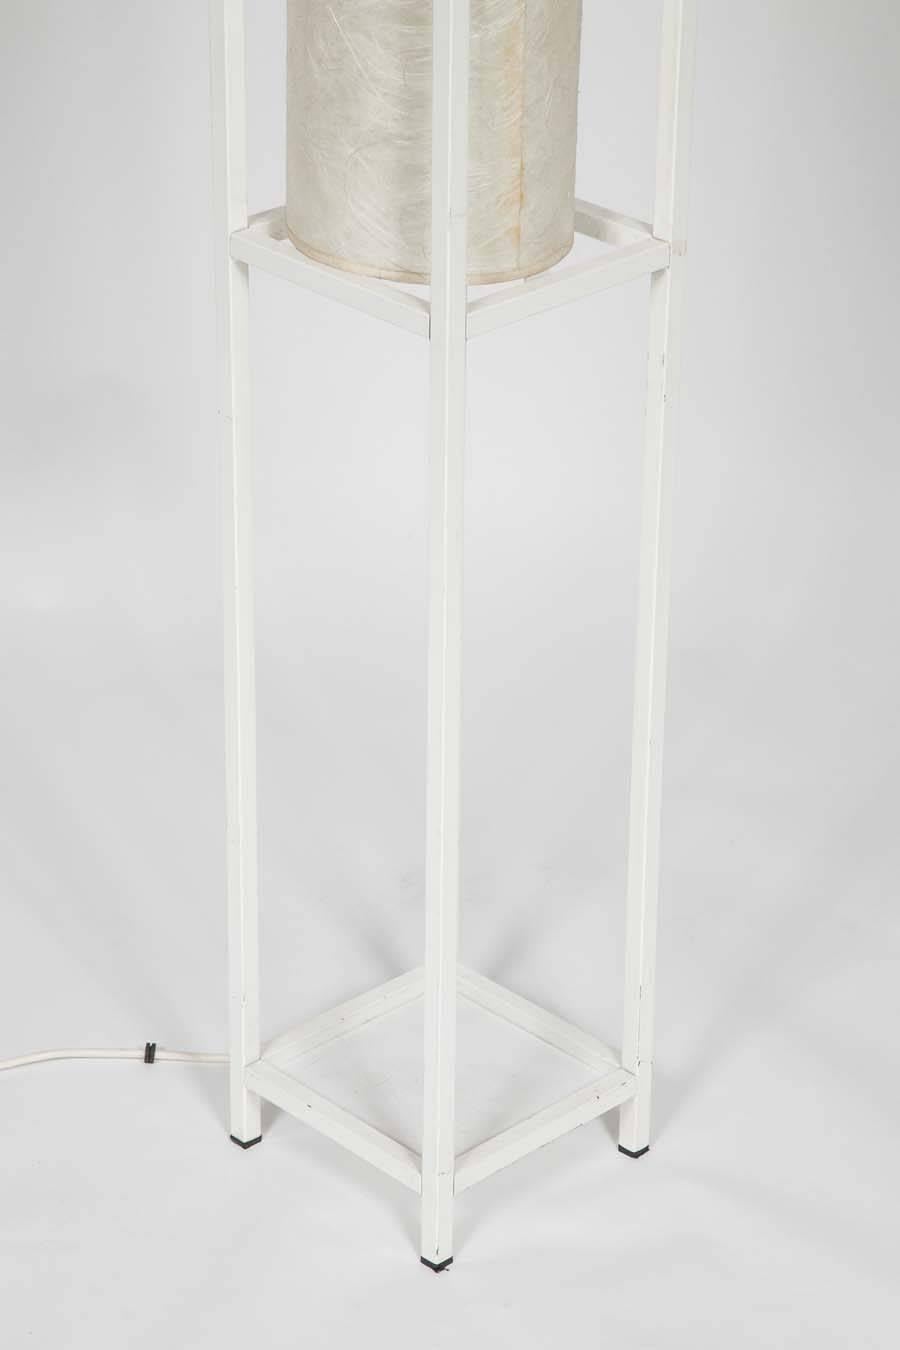 20th Century Minimalist Tall White Metal Floor Lamp with Coated Paper Shade For Sale